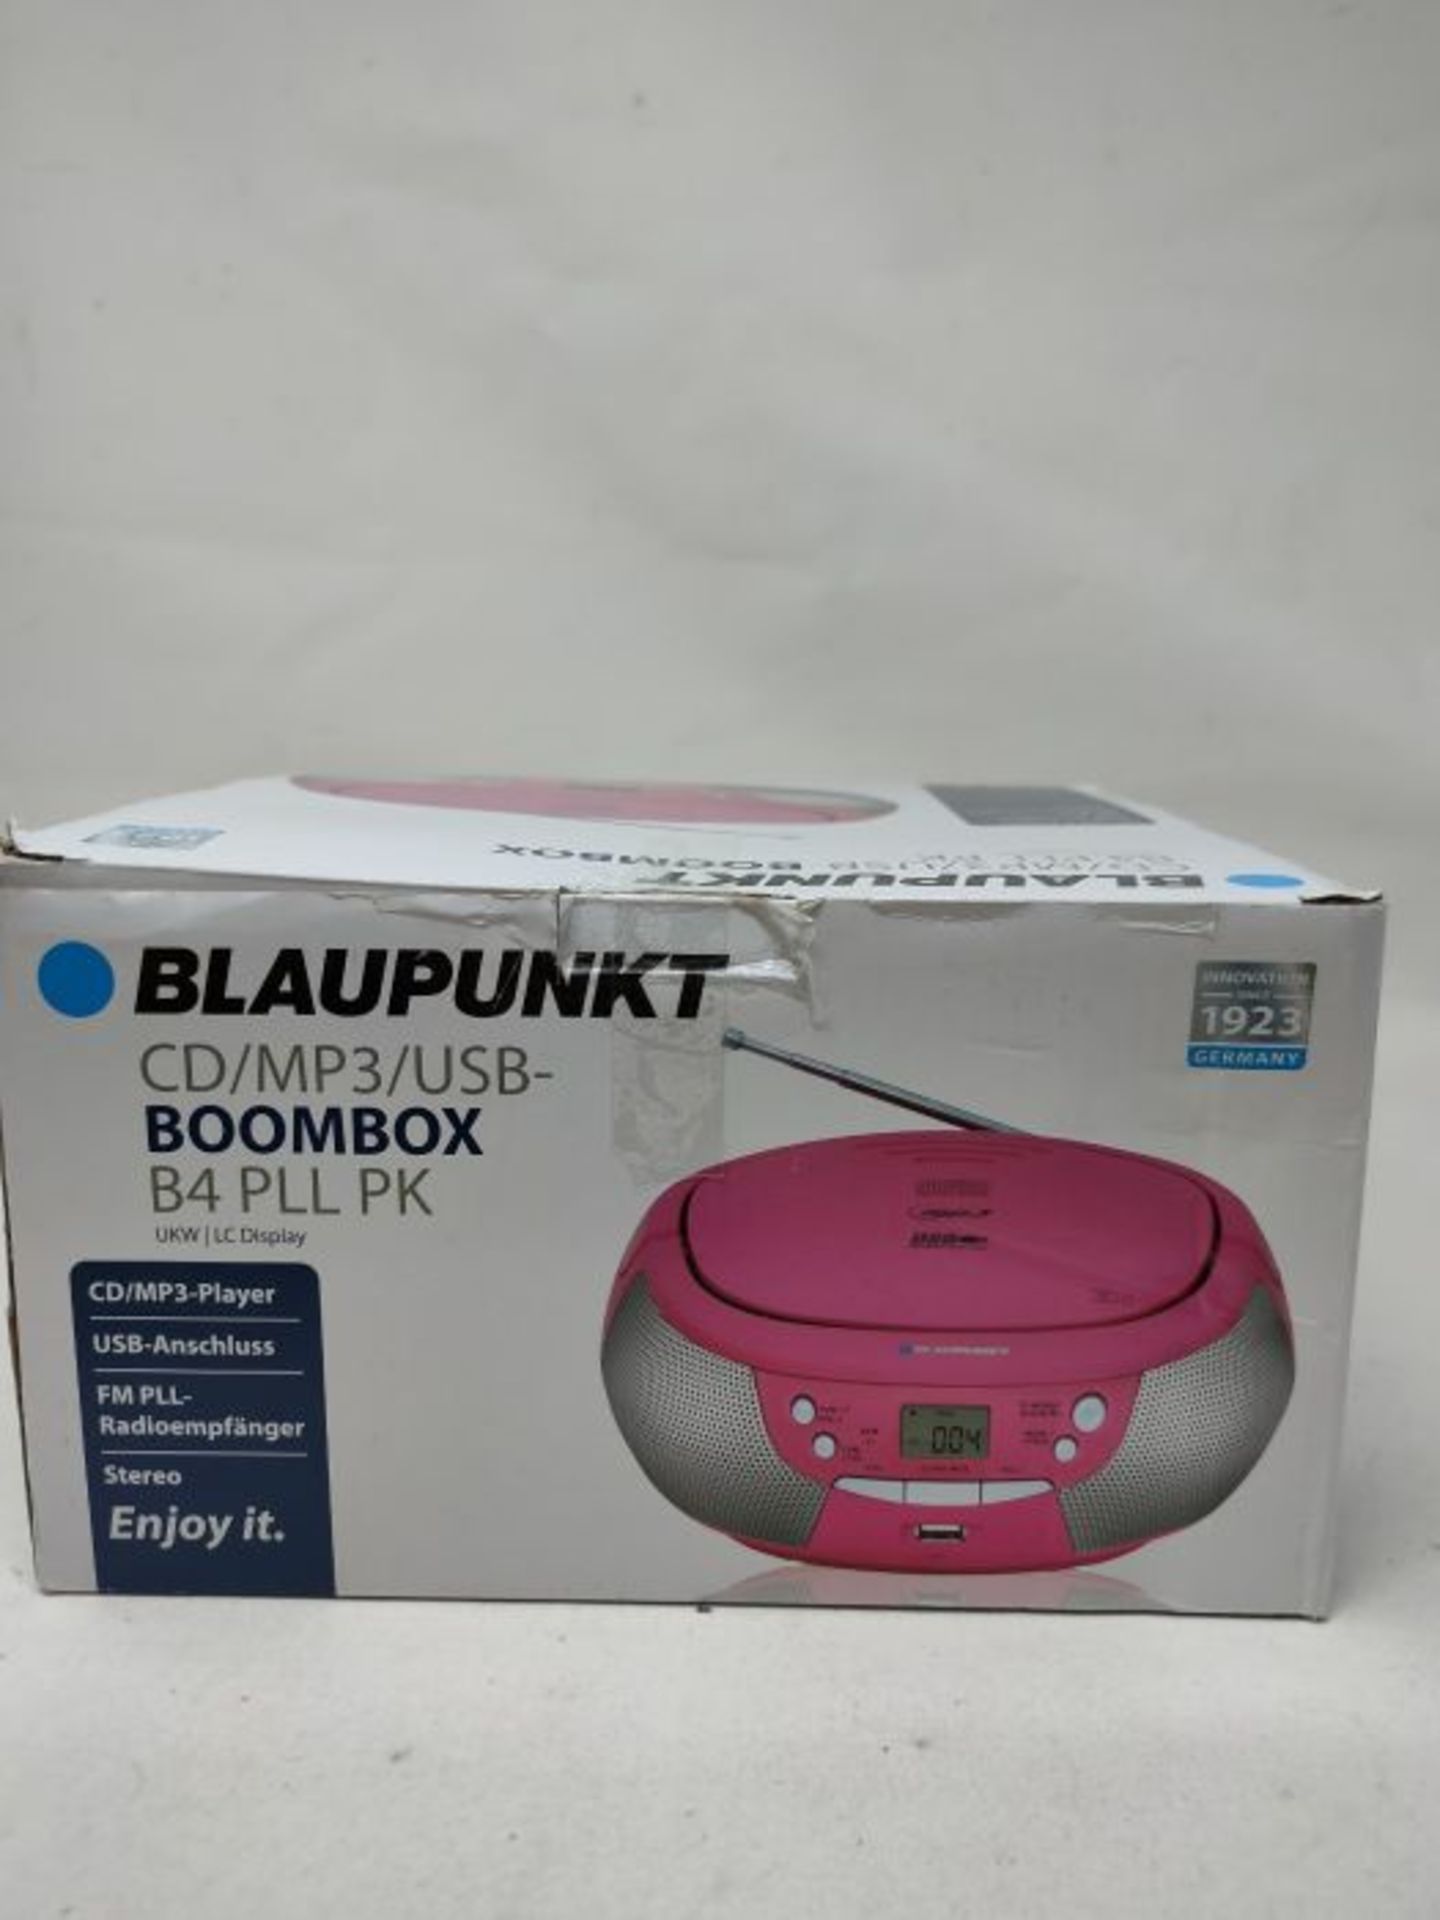 Blaupunkt Boombox B 4 PLL with UKW MP3/PLL Radio/CD Player/USB/AUX IN/Stereo Speakers - Image 2 of 3